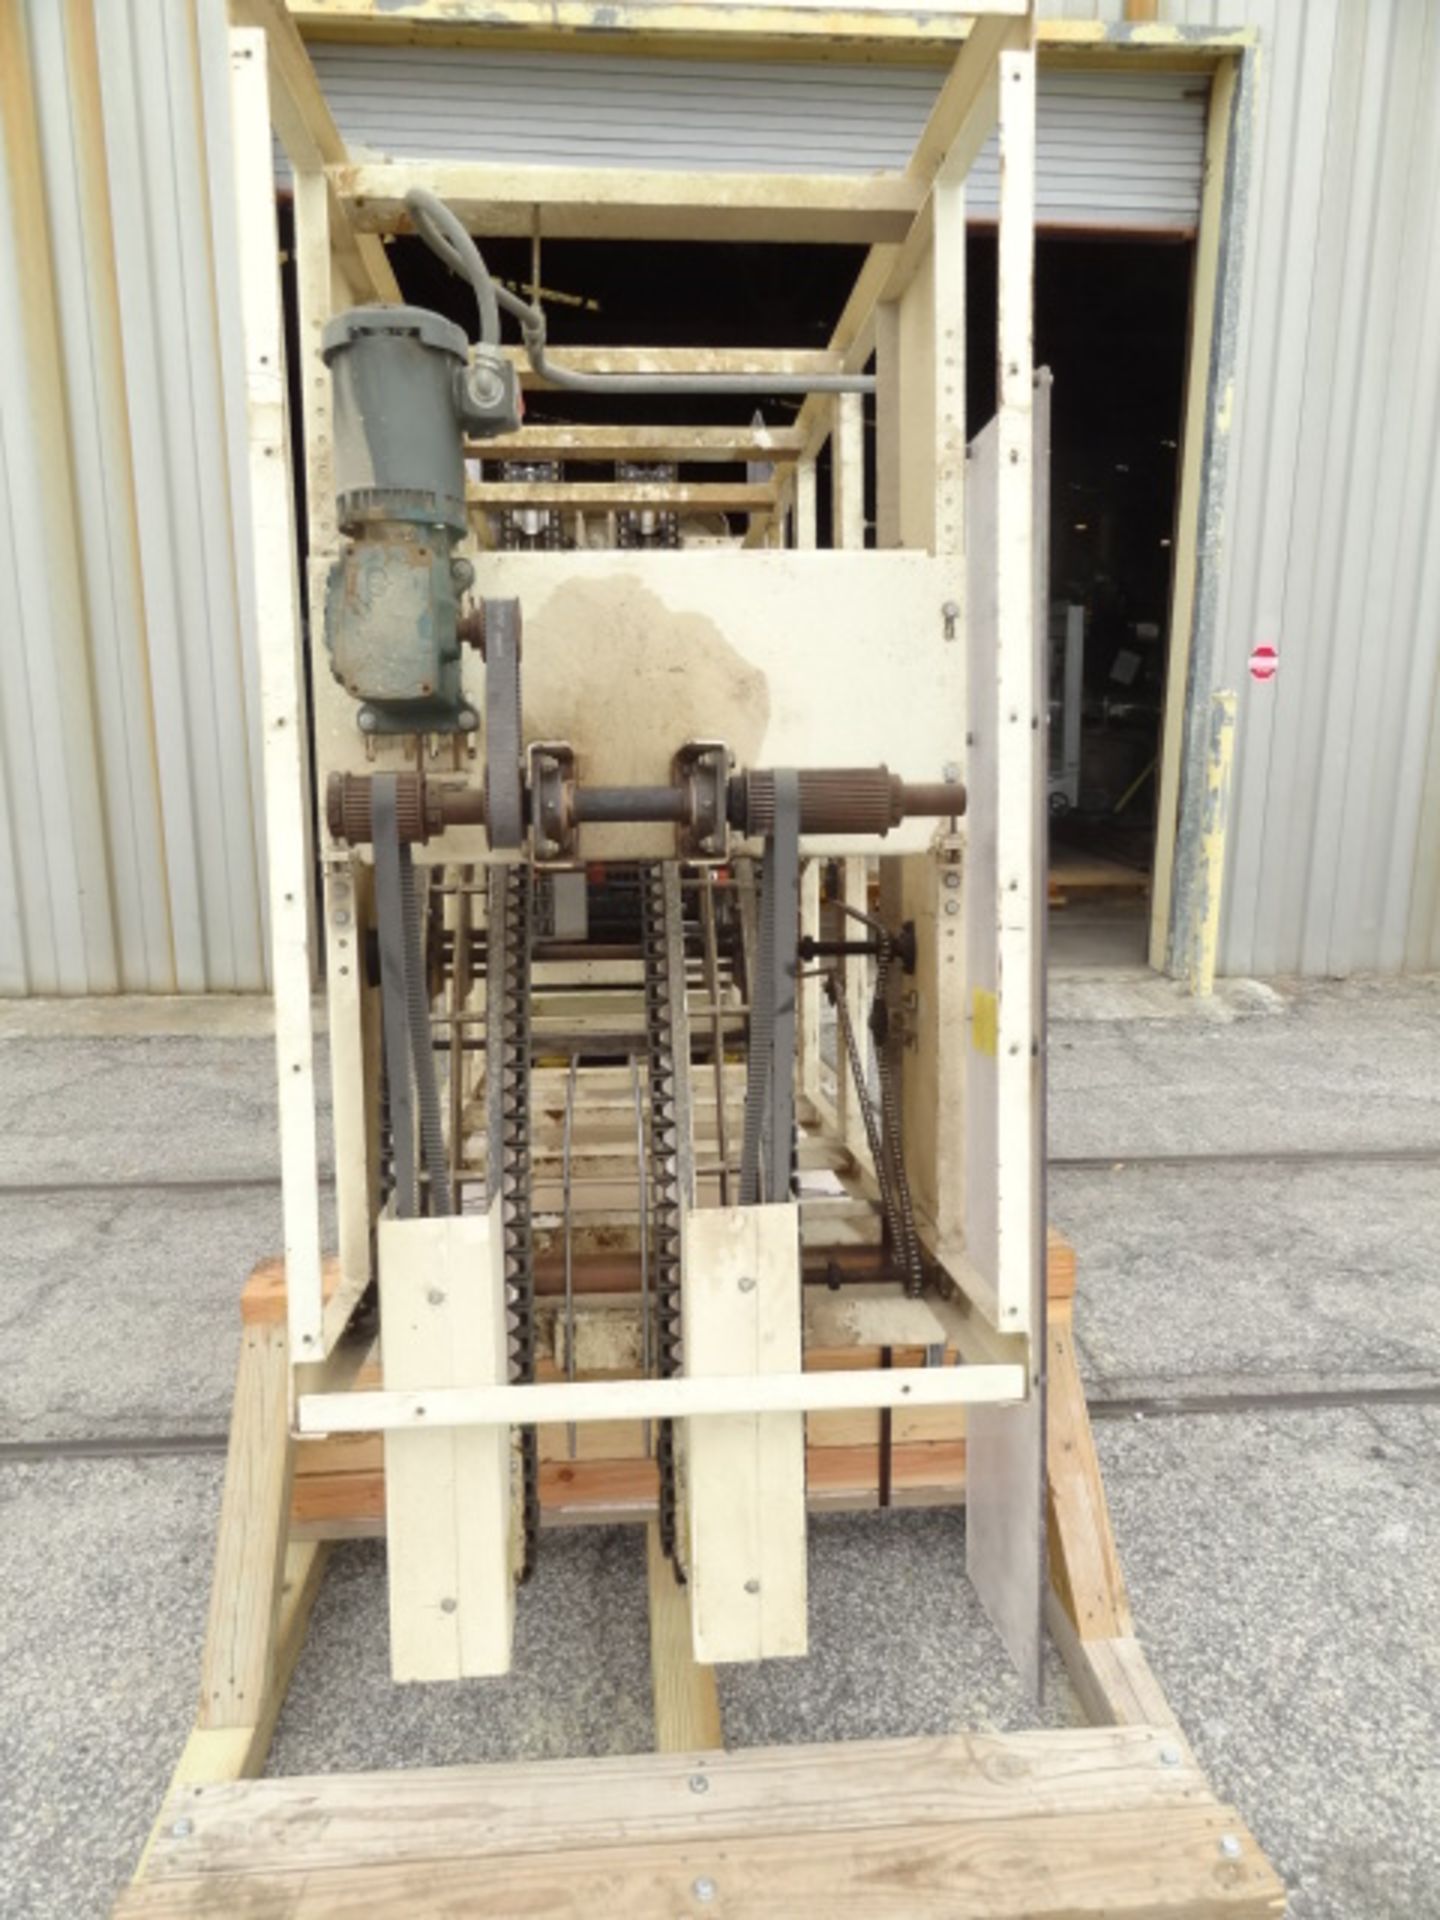 ROE Case Lowerator/Elevator, Model Lowerator, S/N 5657-MGLS, Case Lowerator with Gripper Belts, - Image 4 of 5